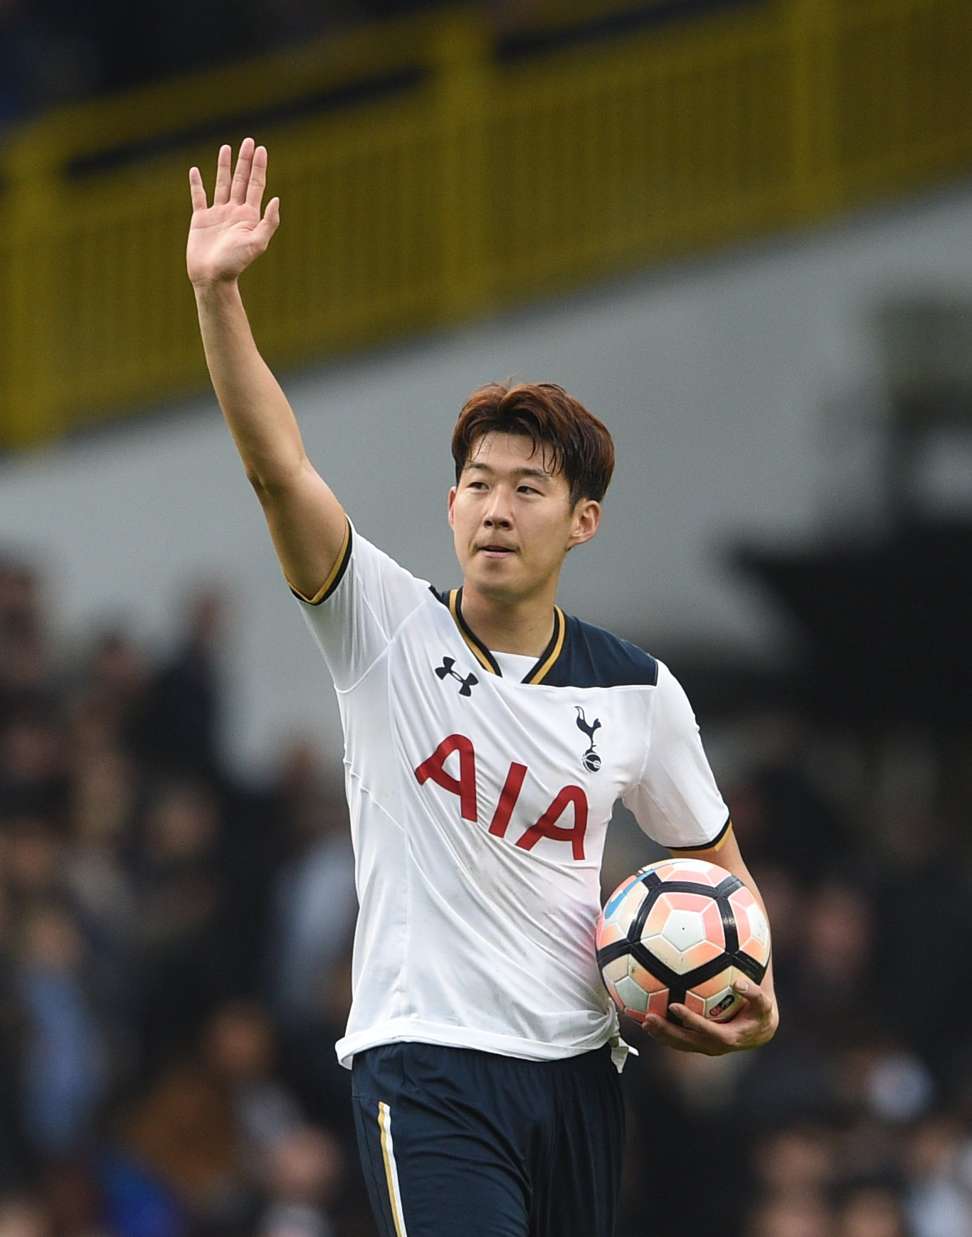 Tottenham Hotspurs’ Son Heung-min with the match ball after his hat-trick against Millwall. Photo: EPA